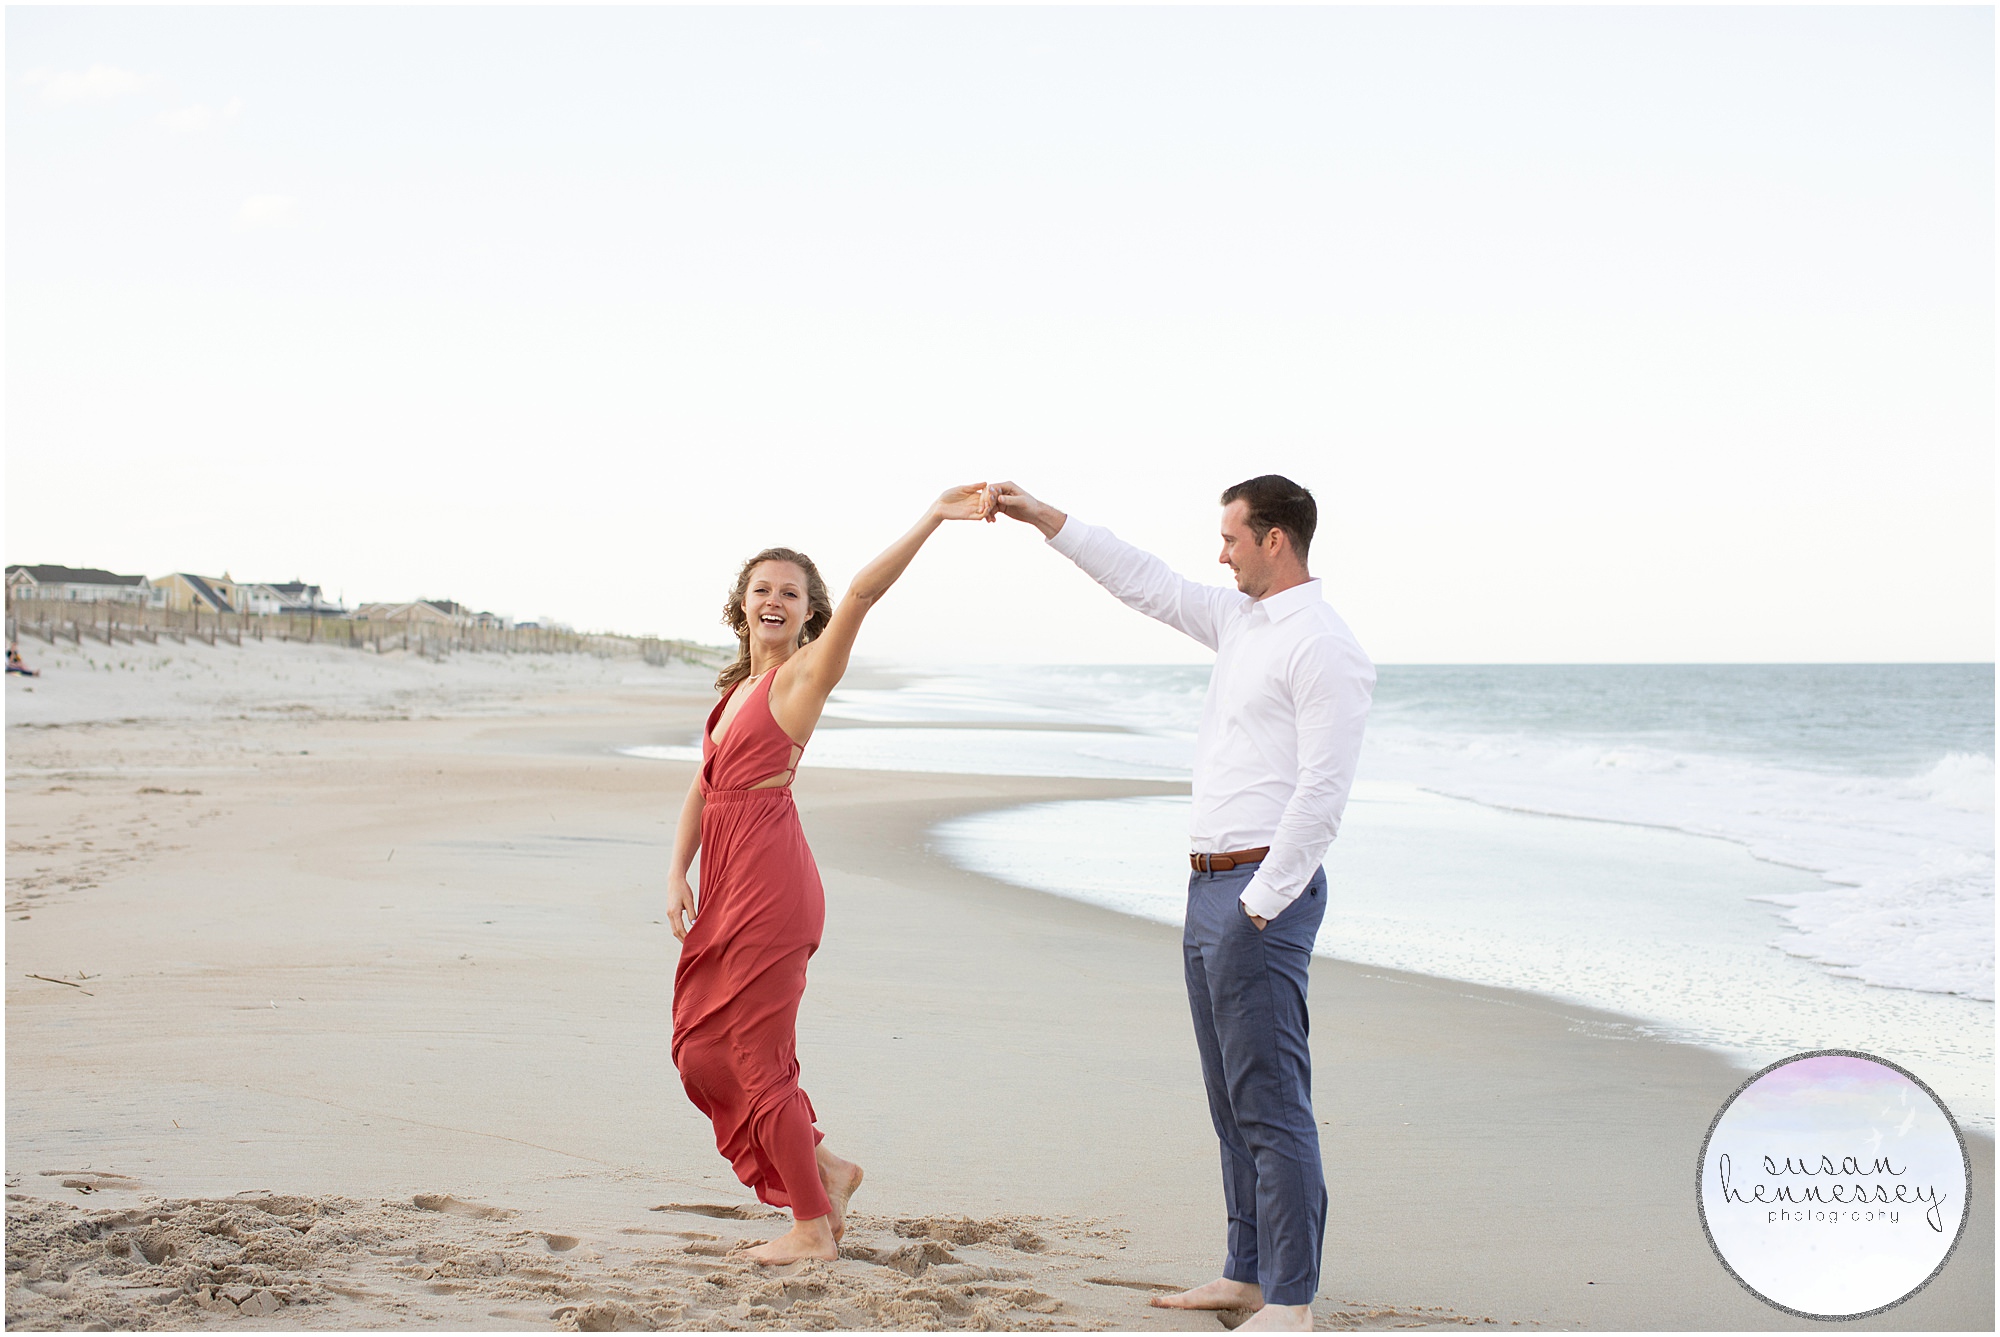 A groom twirls his future bride by the ocean.